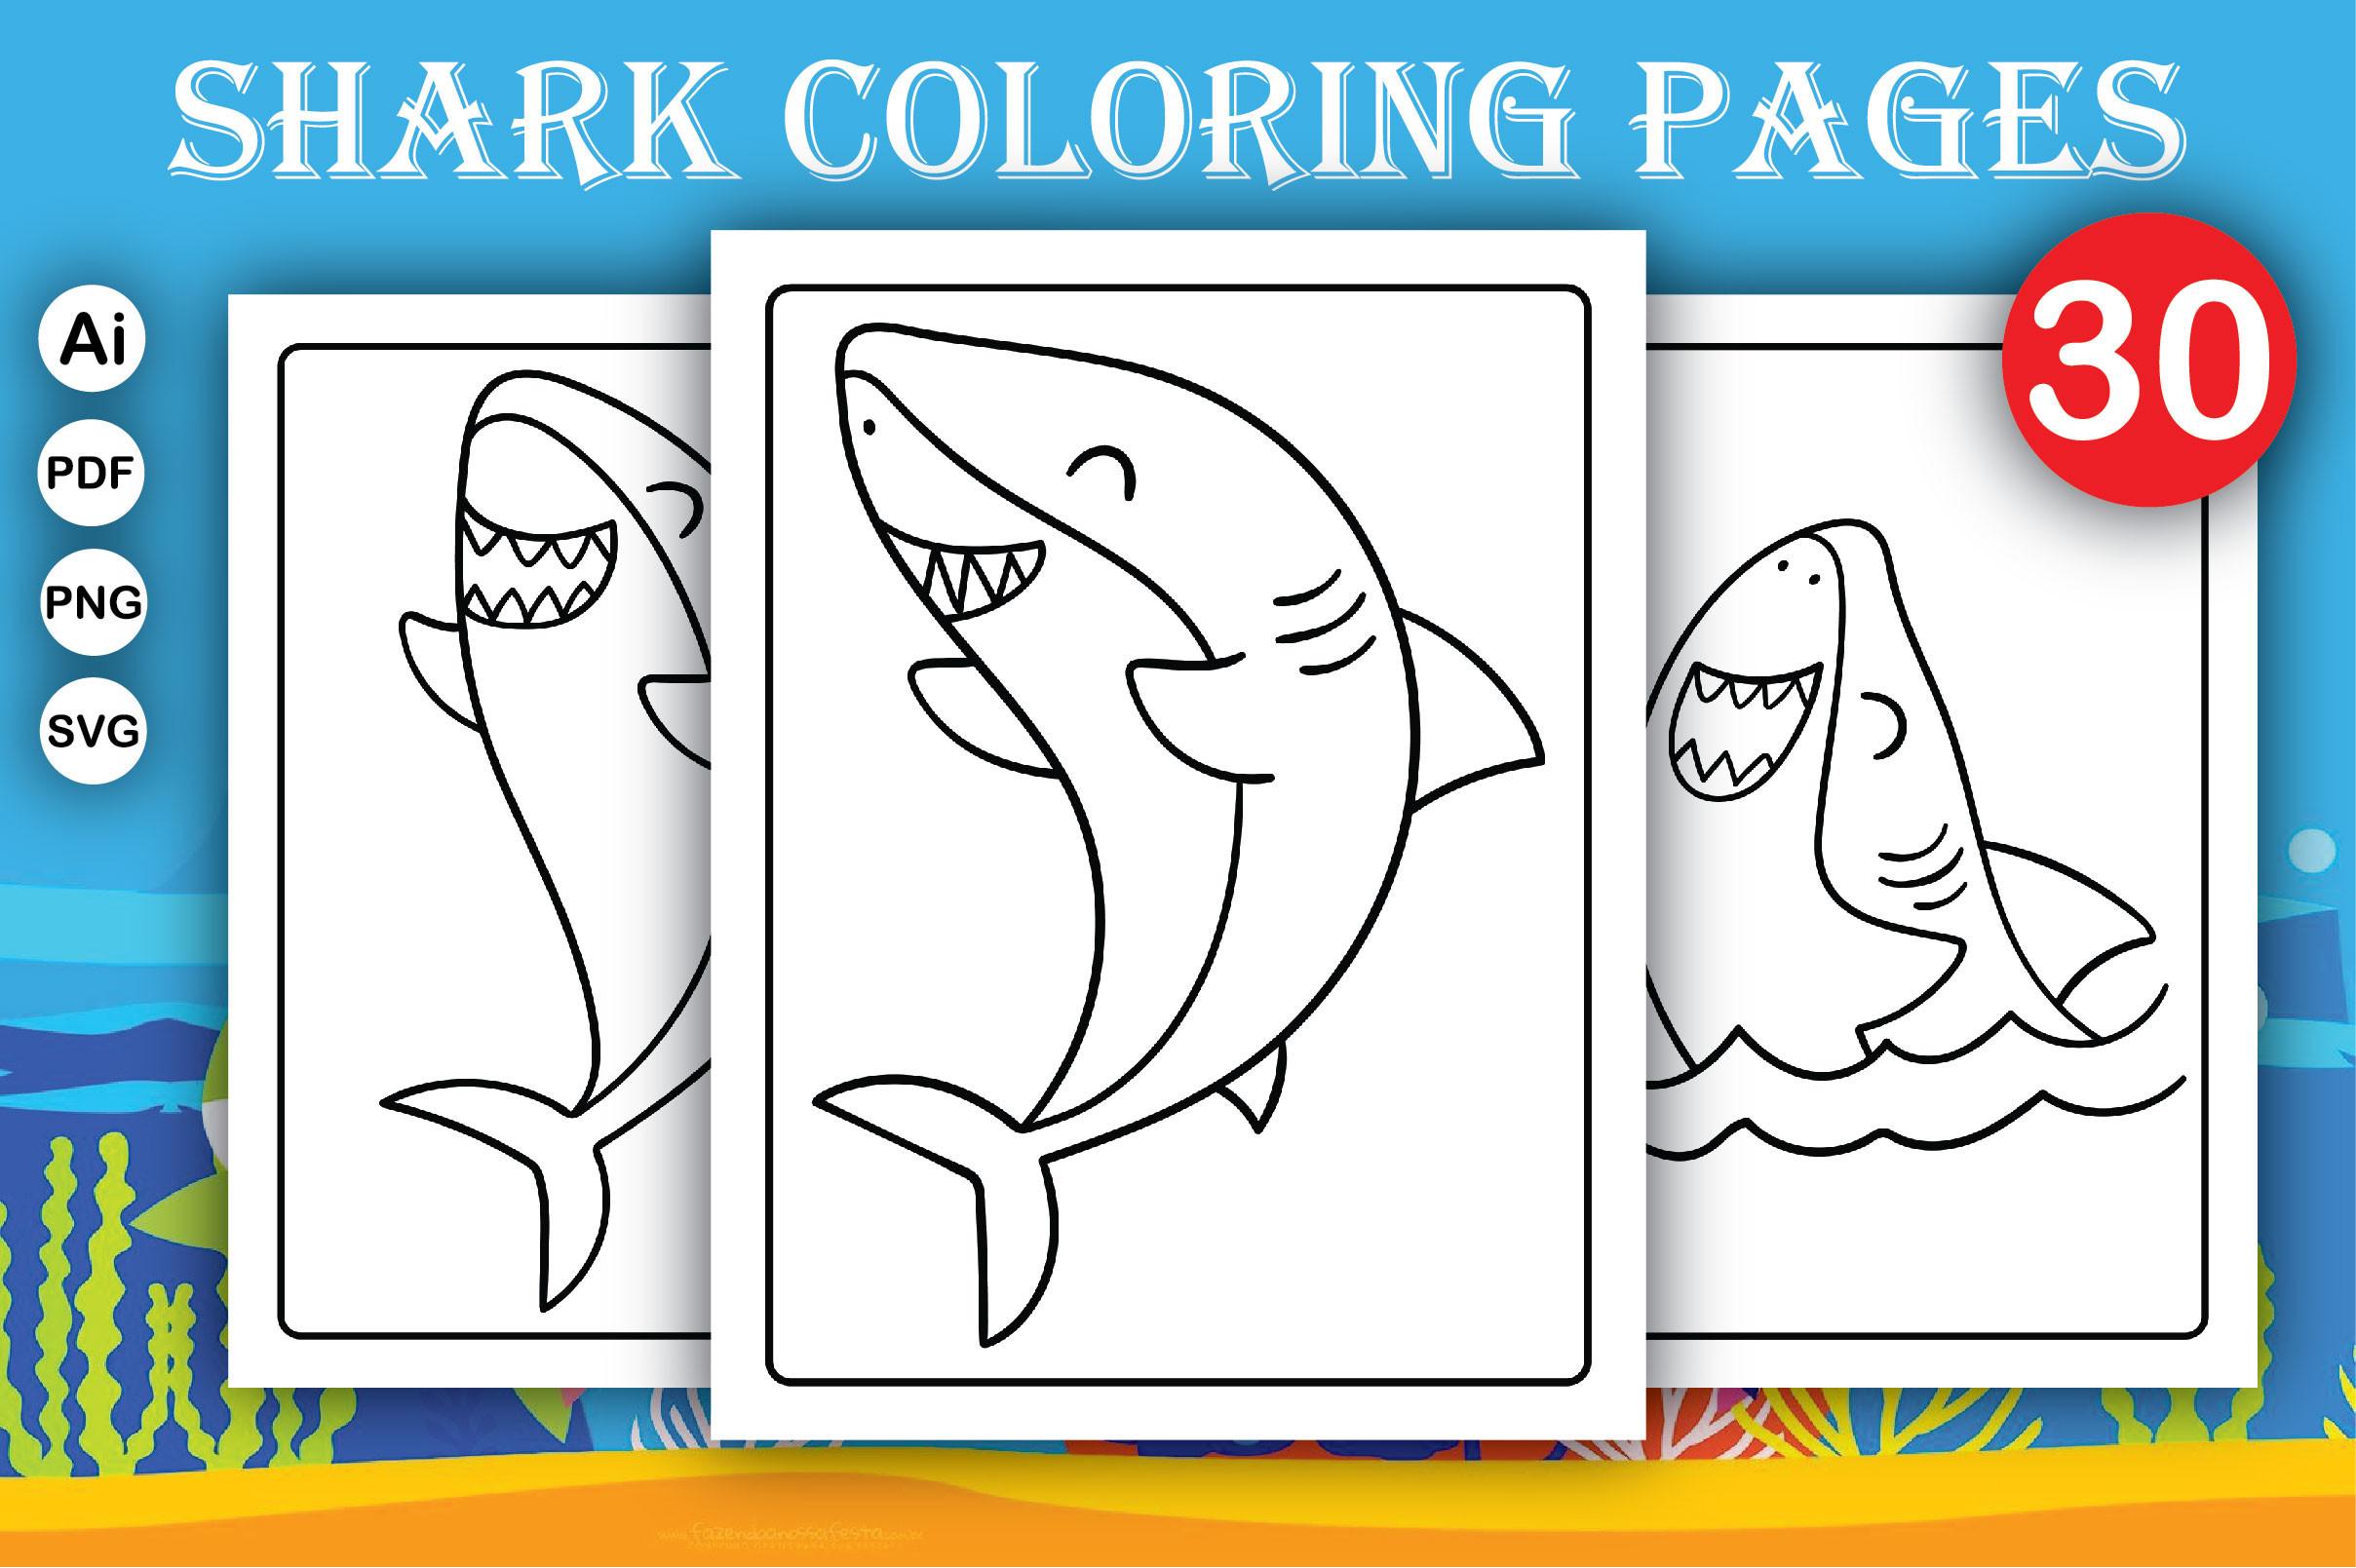 Sea Shark Coloring Pages and Books-KDP